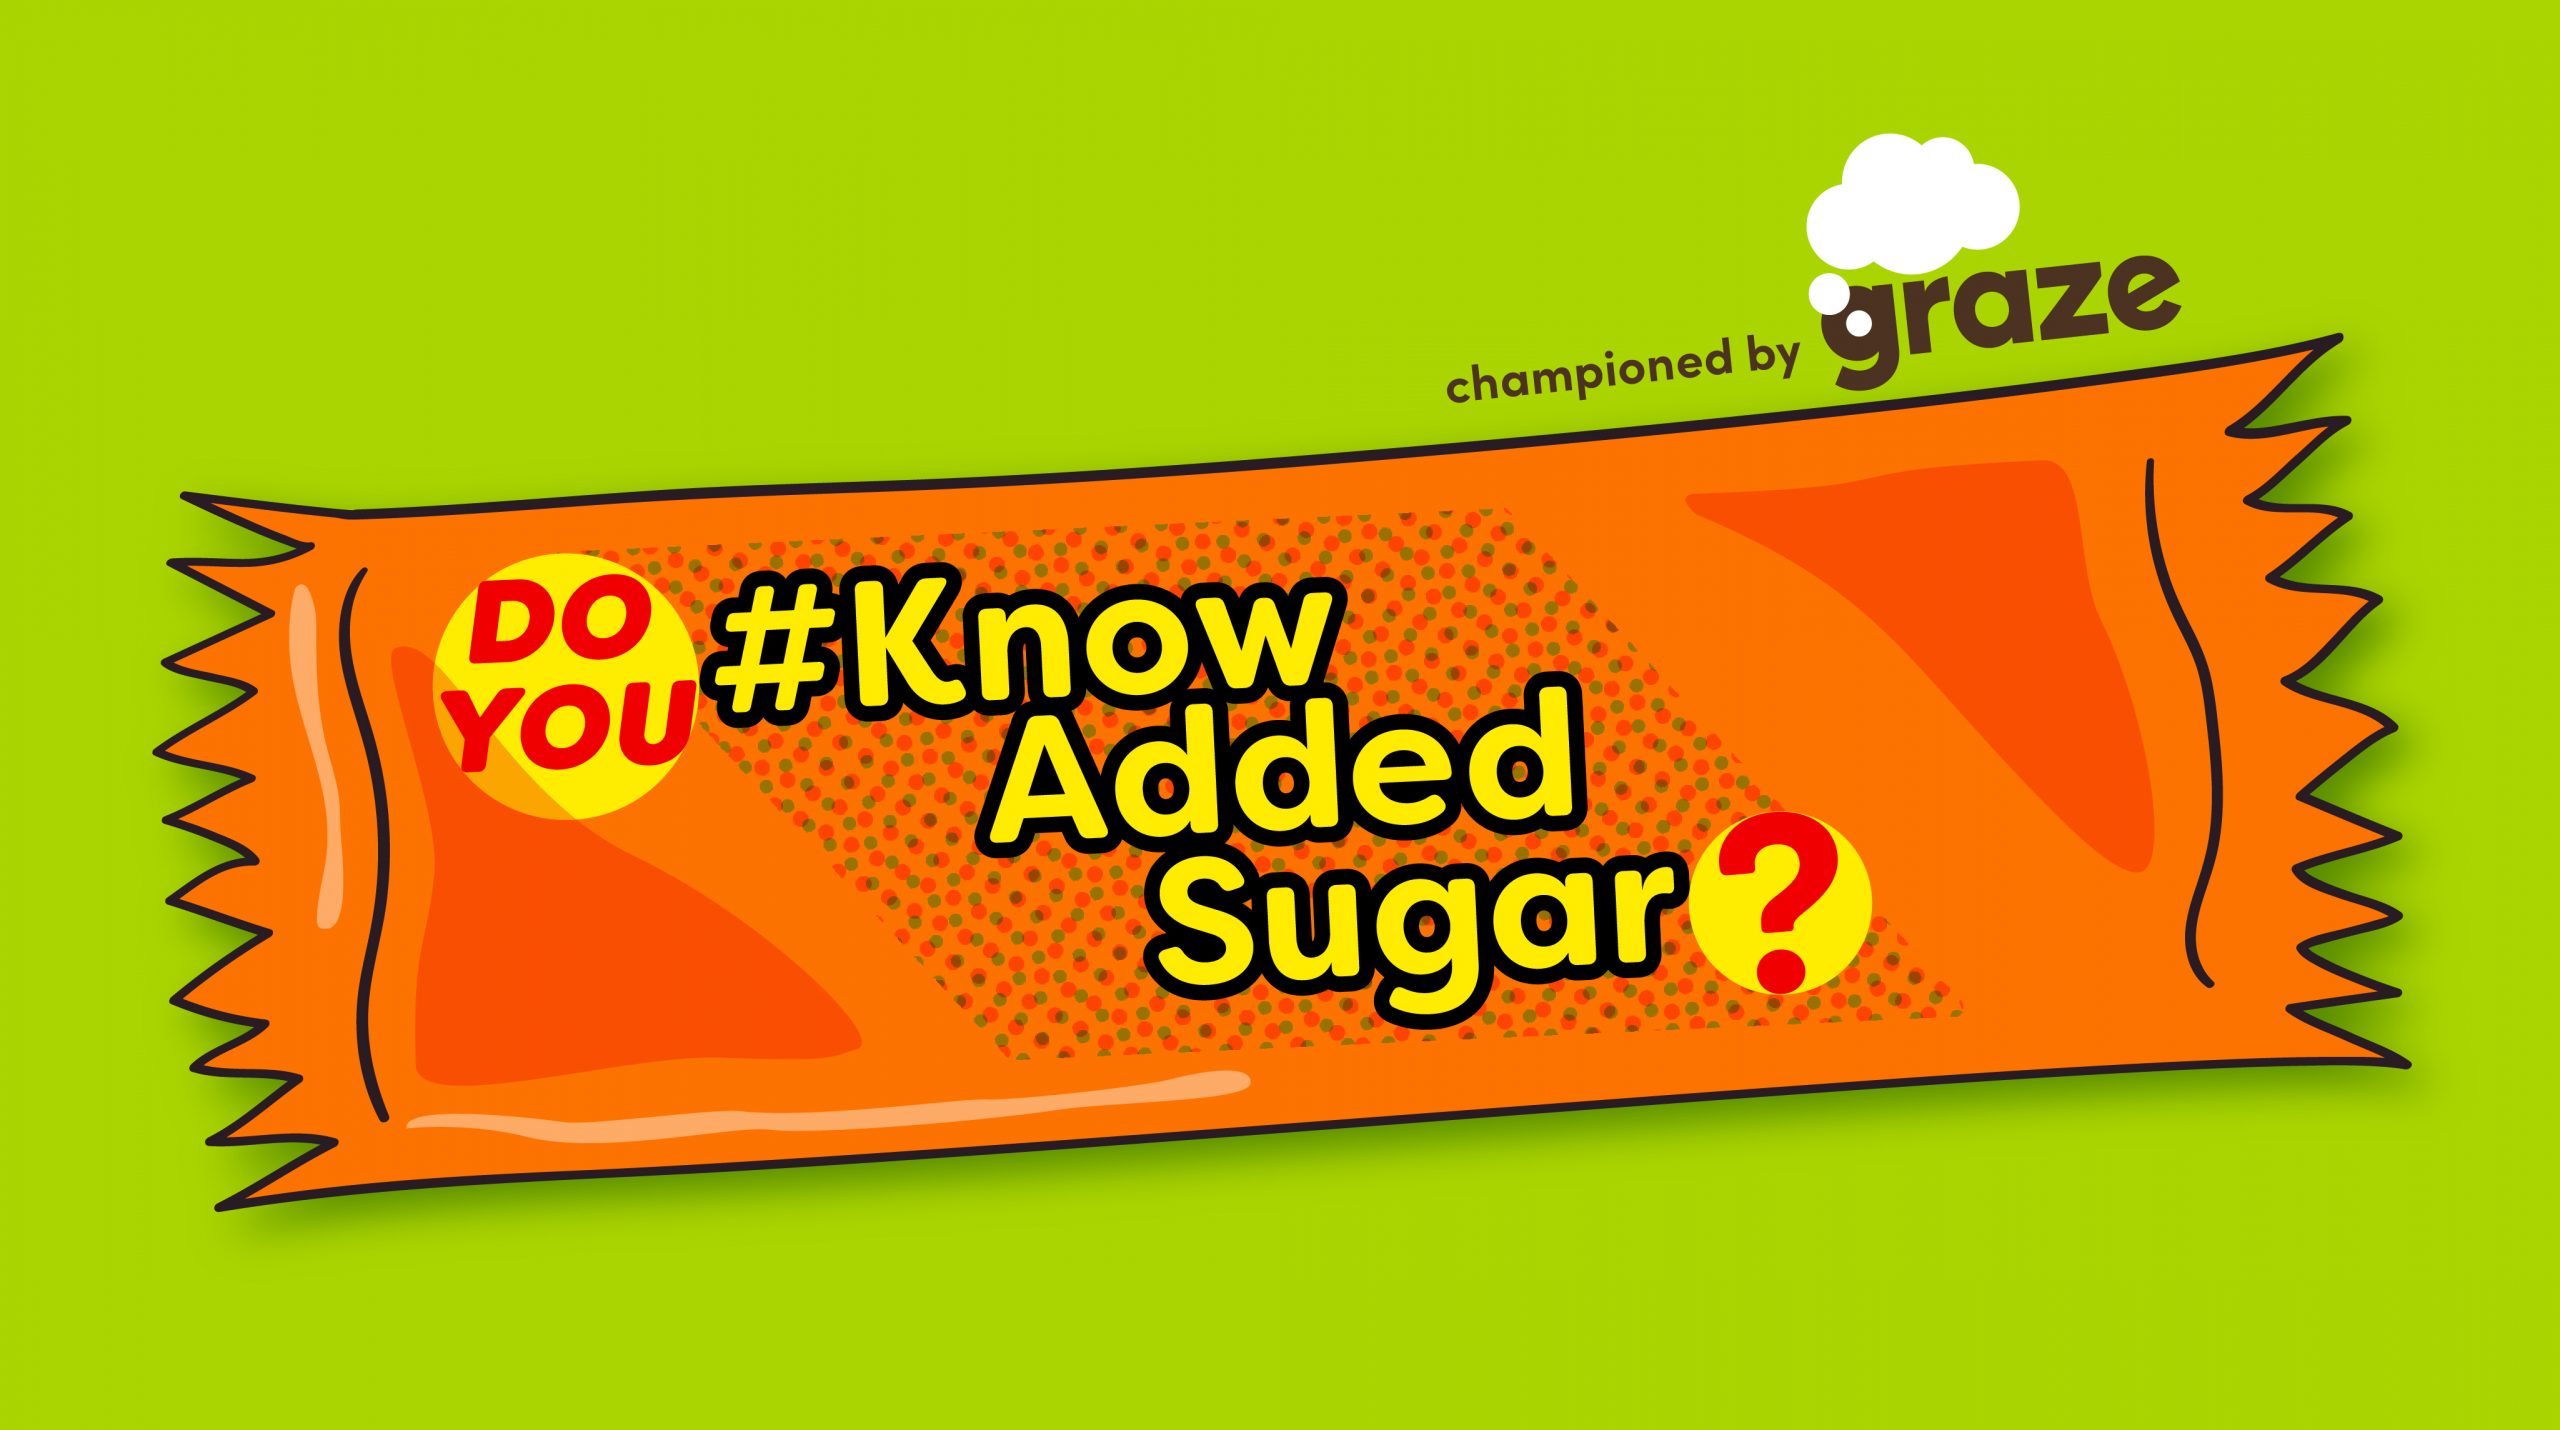 graze launches campaign to unwrap the truth behind ‘added sugar’